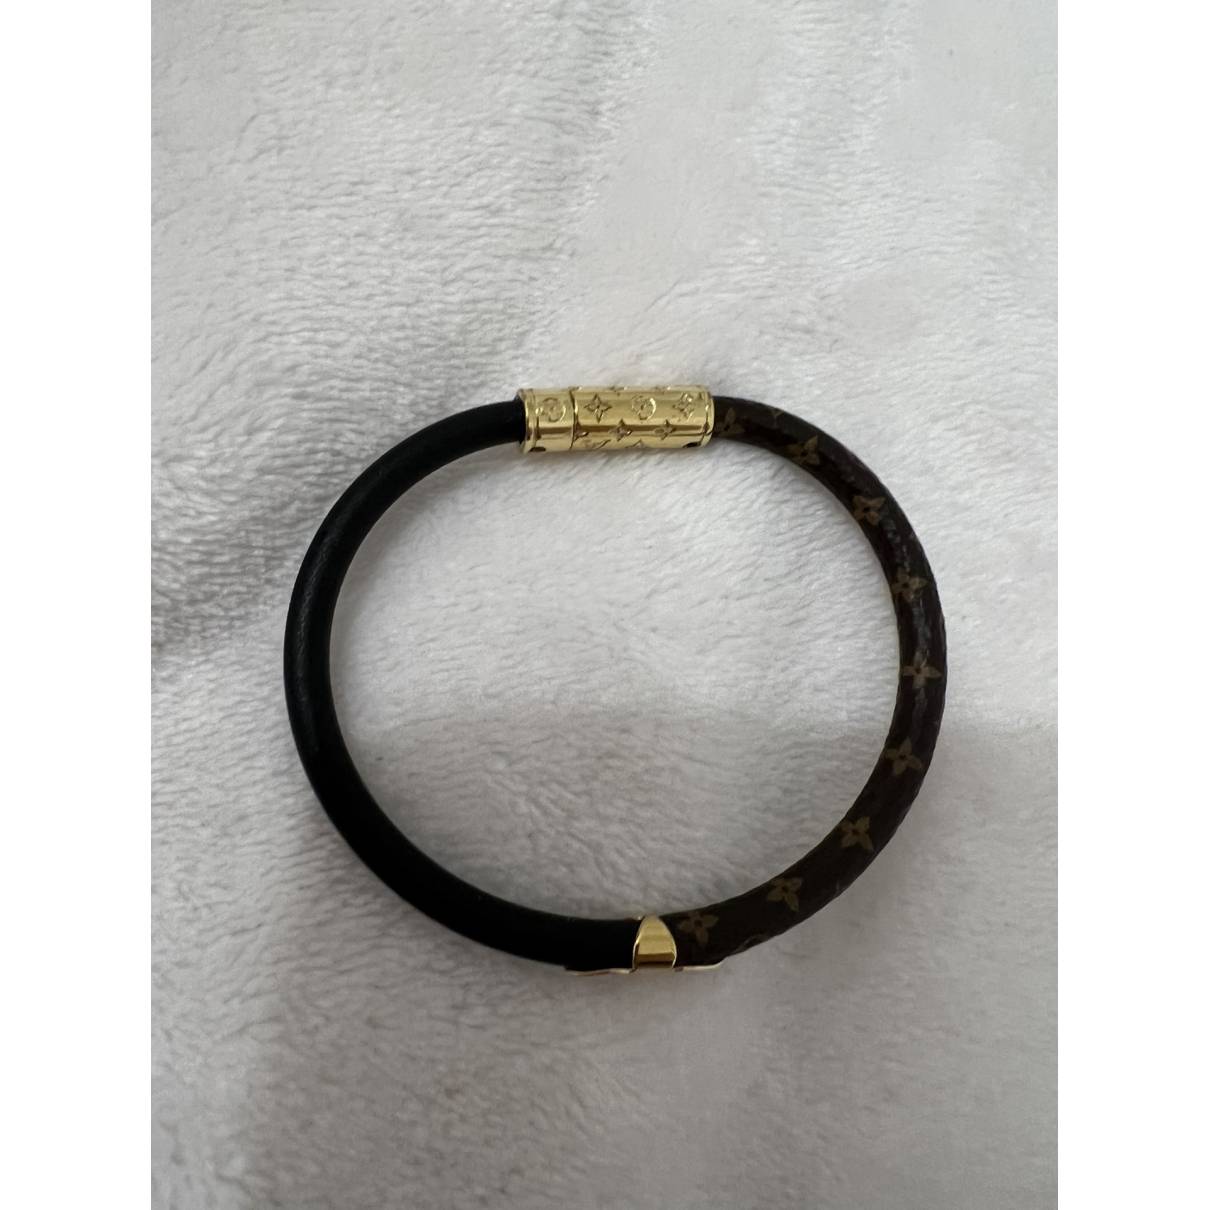 Daily Confidential leather bracelet